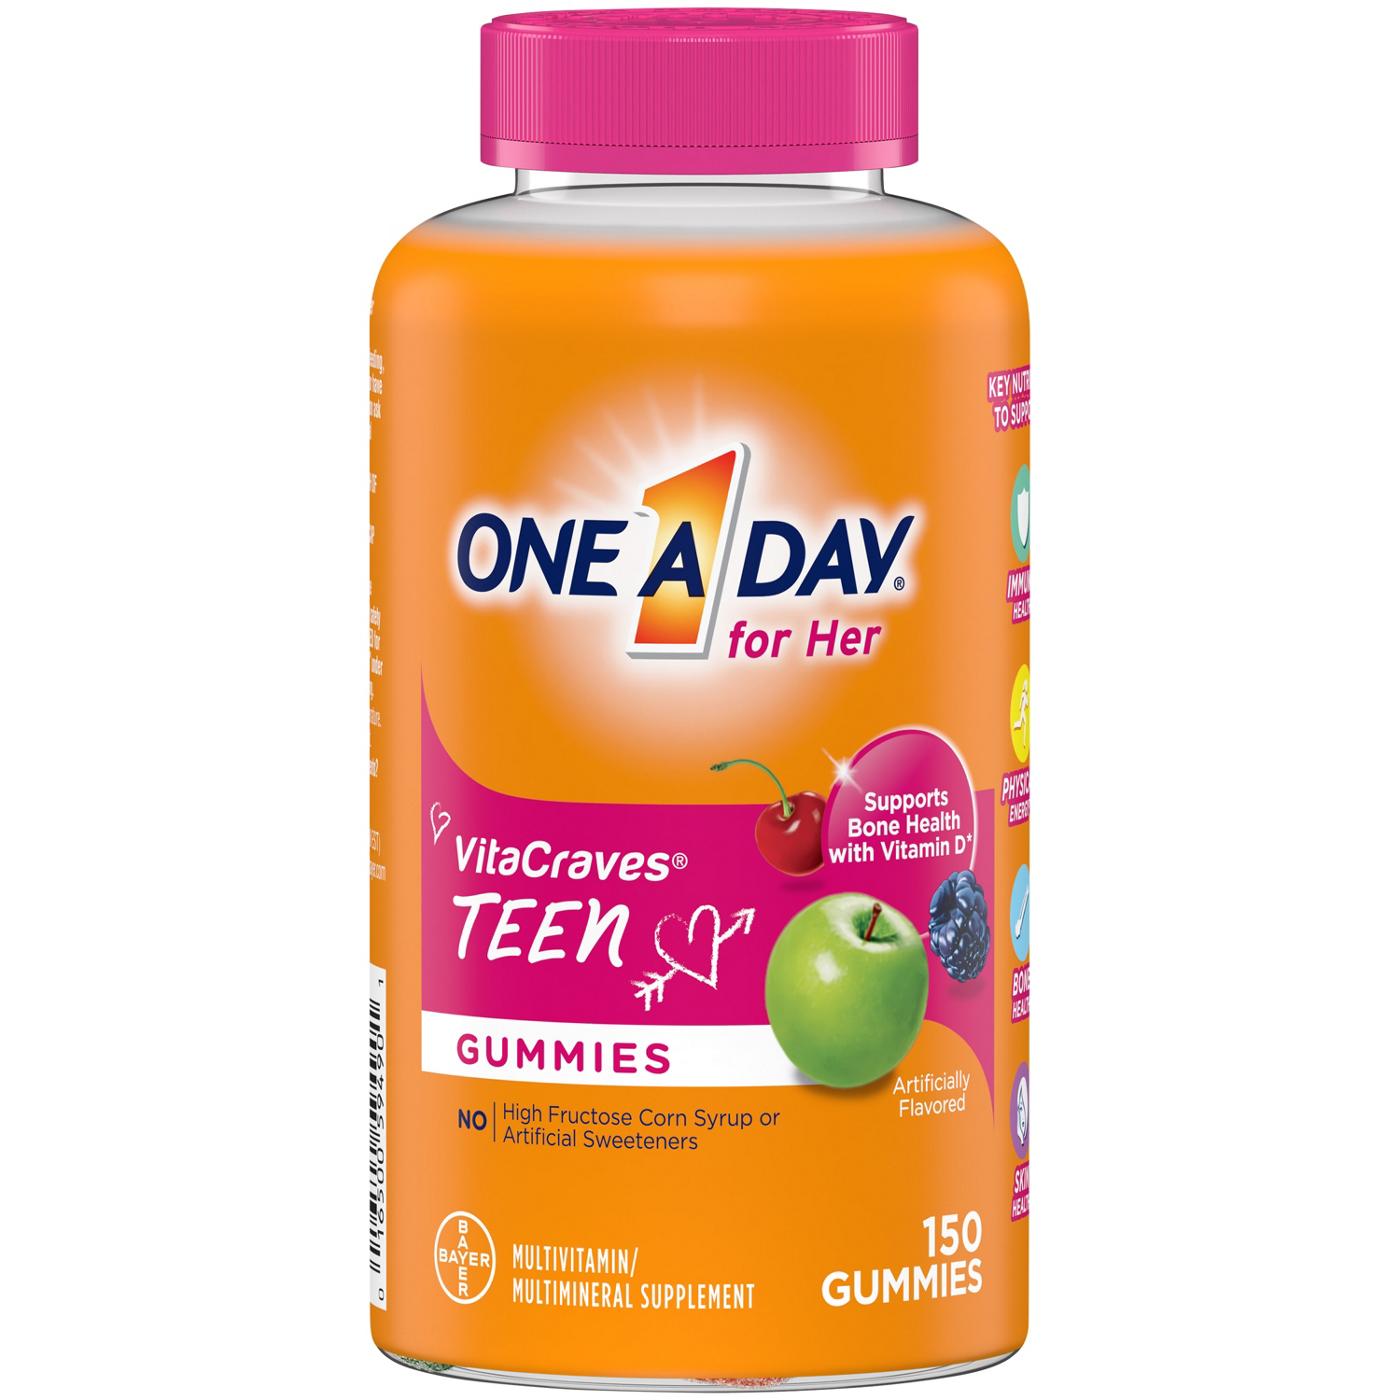 One A Day For Her VitaCraves Teen Gummies; image 1 of 6